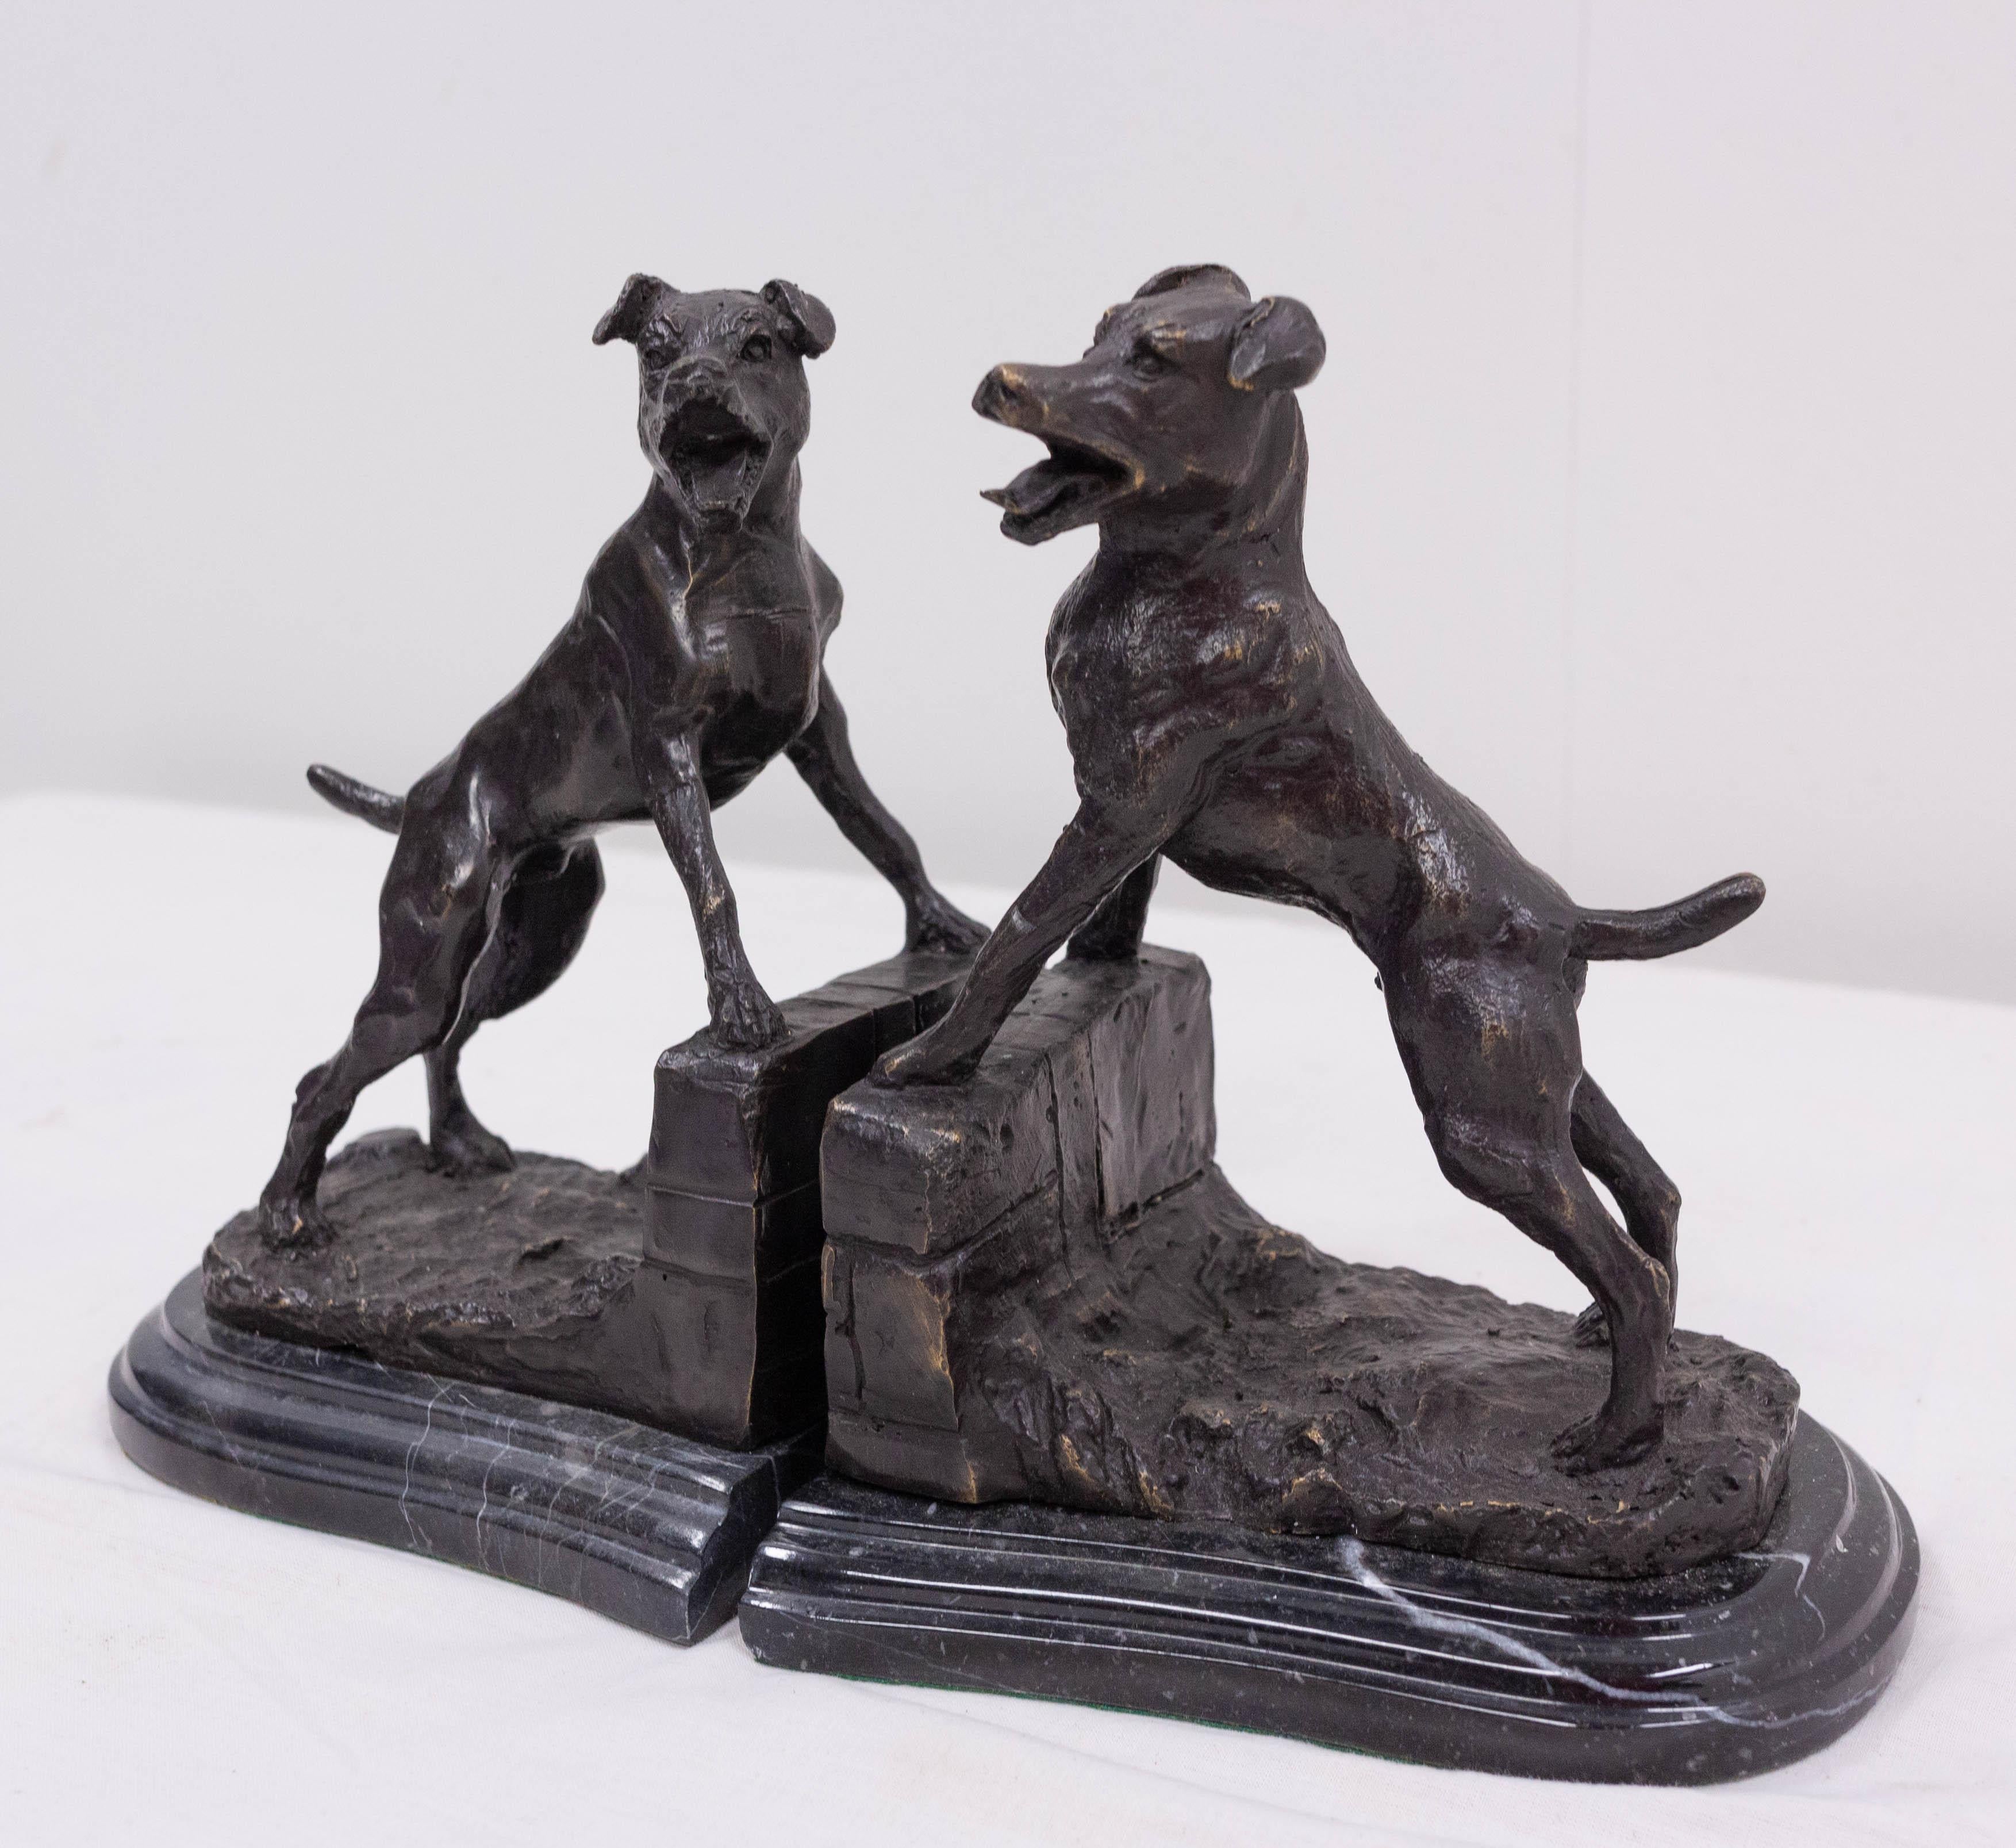 Pair of Edouard Drouot bookends representing barking dogs
Marble and Bronze, made in France
Dimensions of each piece W 5.71 in. (14.5 cm) D 5.12 in. (13 cm) H 7.49 in. (19 cm)
Very good condition

Shipping:
30/13/19 3.5 kg.